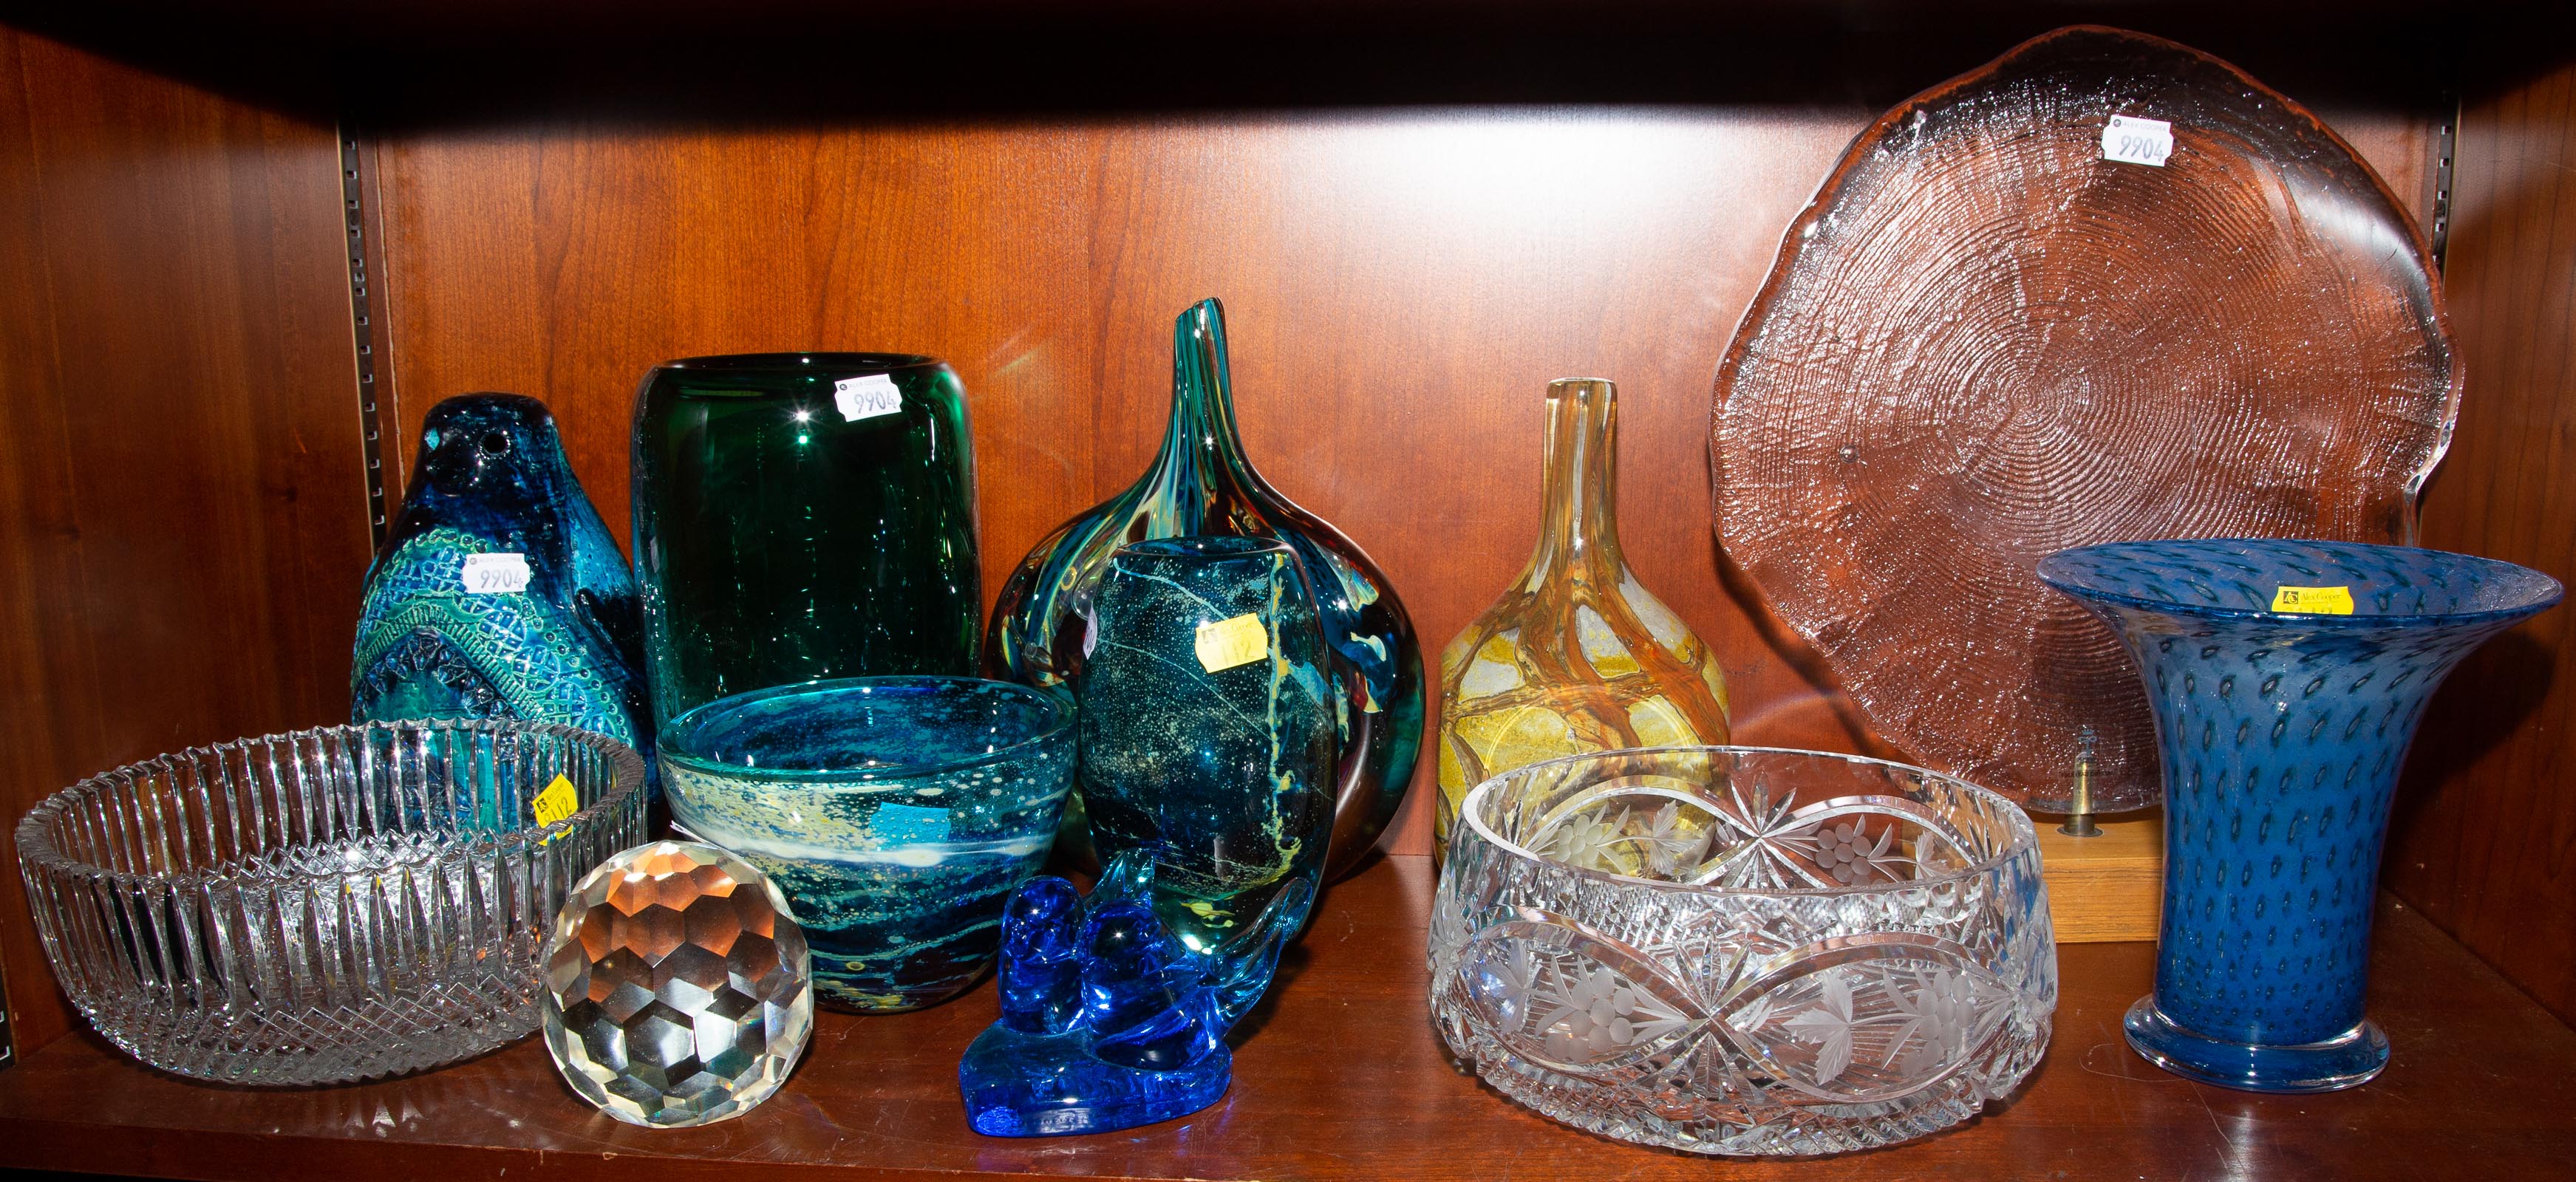 SELECTION OF CONTEMPORARY ART GLASS 333c74